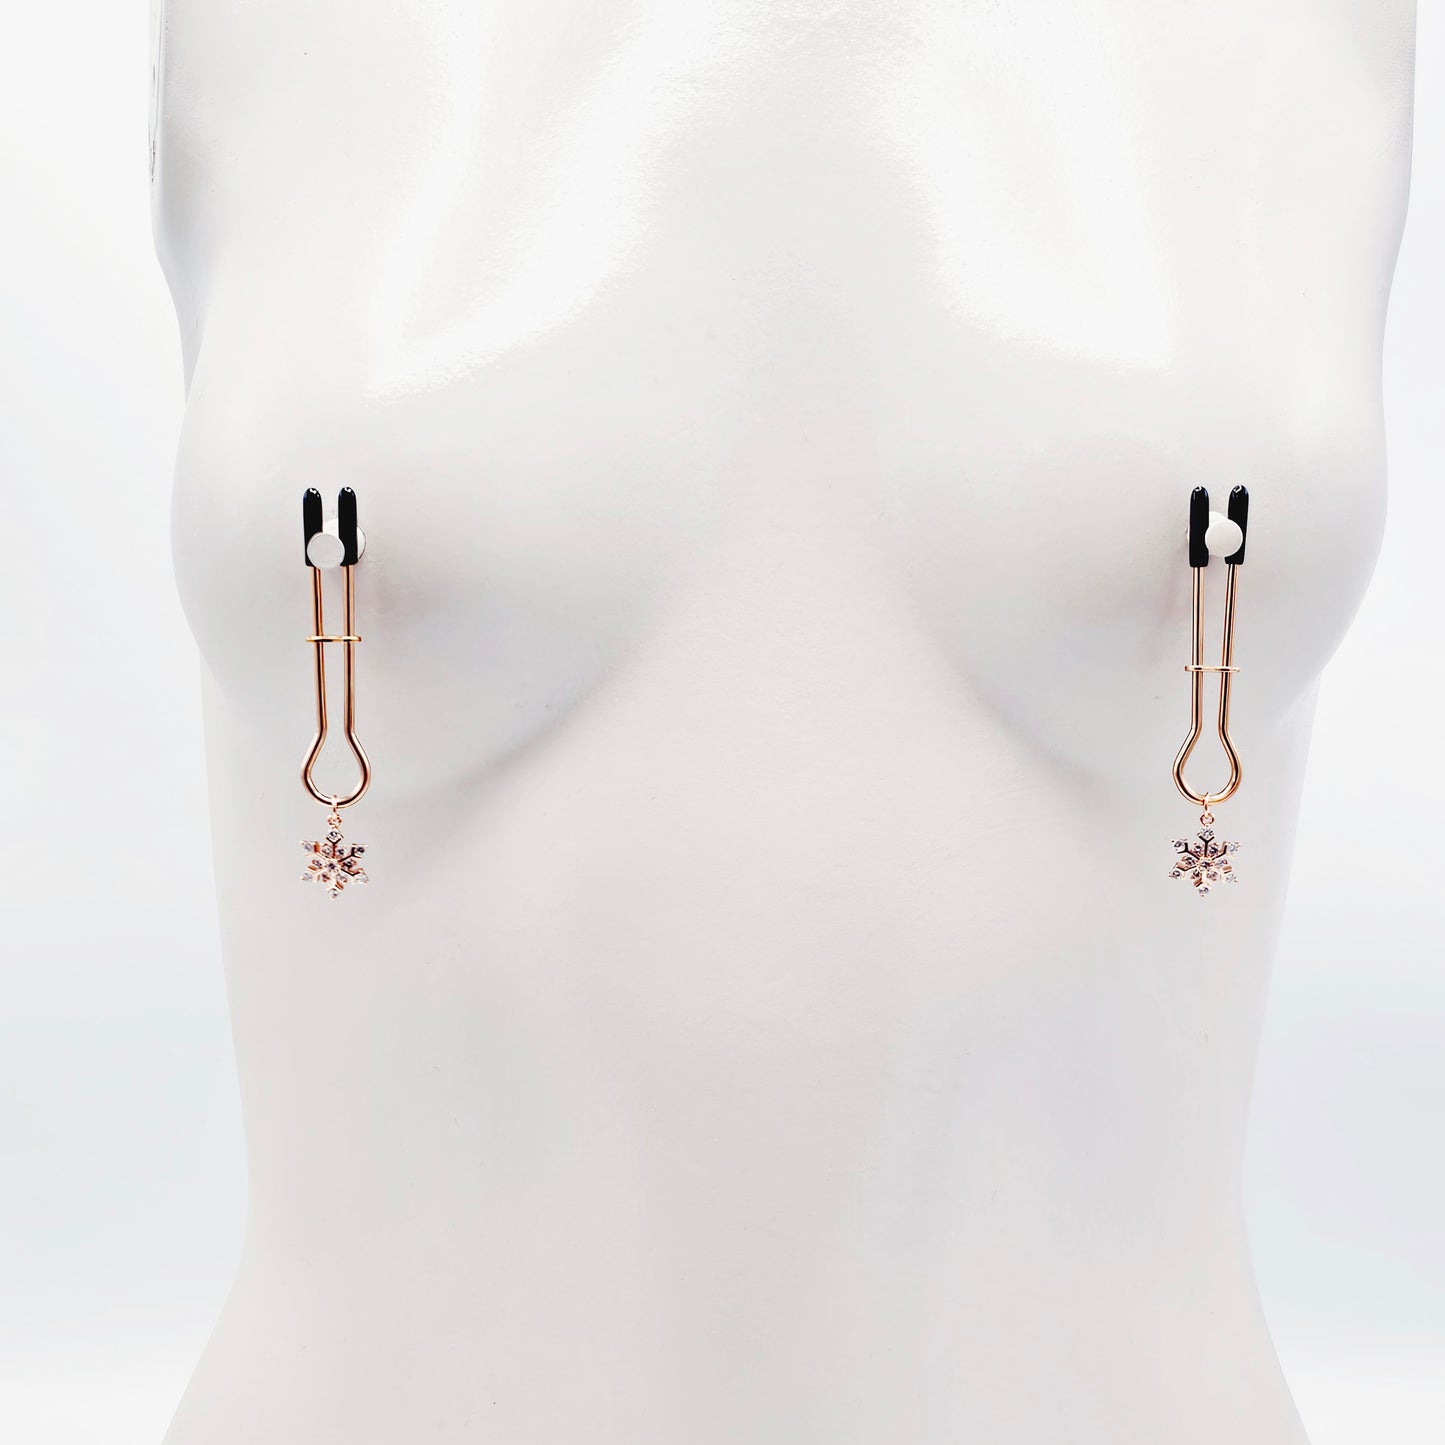 Rose Gold Nipple Clamps with Sparkling Snowflakes. Straight Tweezer Style Clamps.